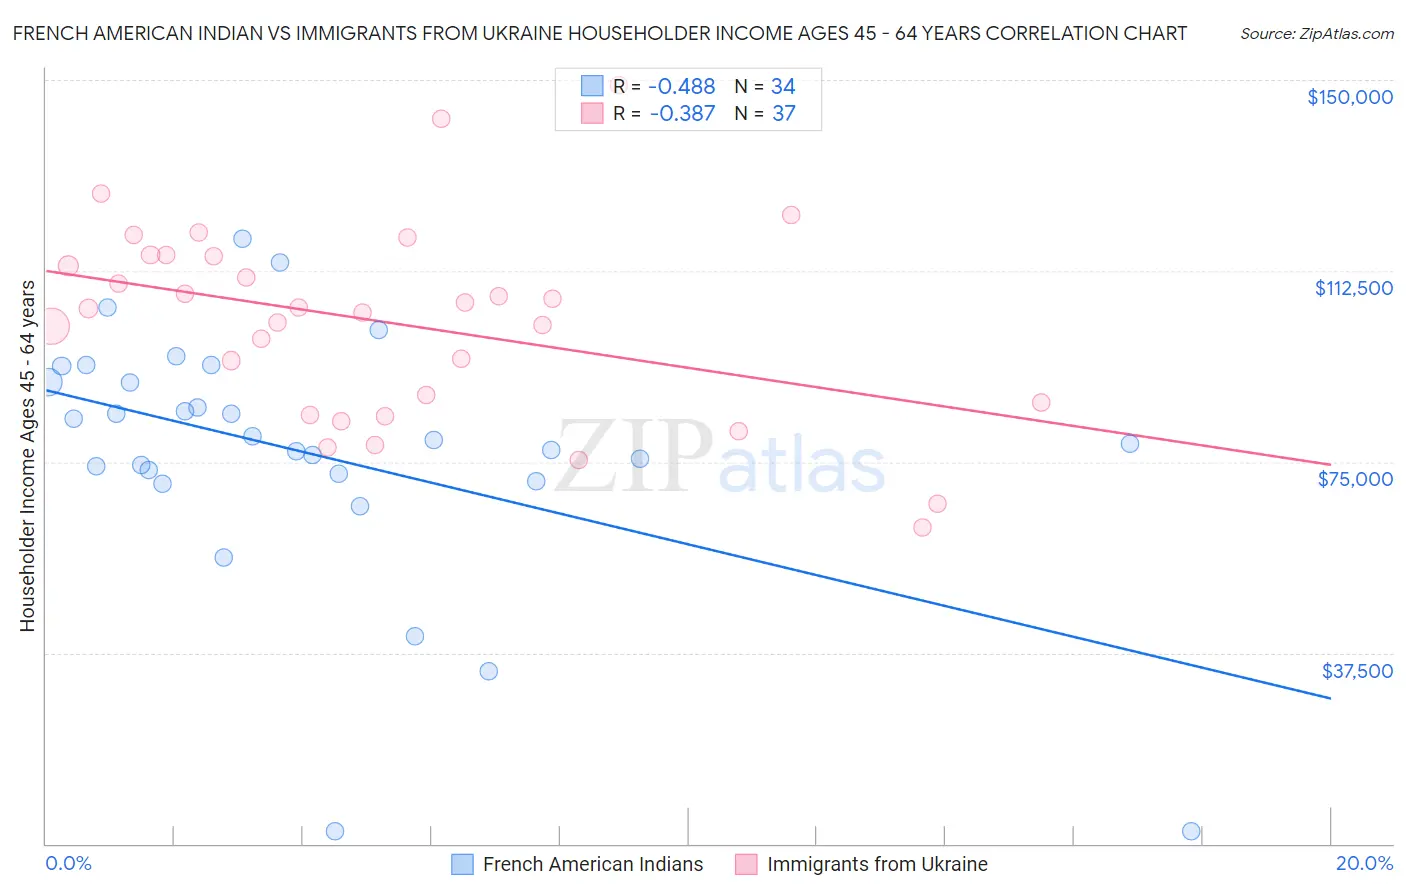 French American Indian vs Immigrants from Ukraine Householder Income Ages 45 - 64 years